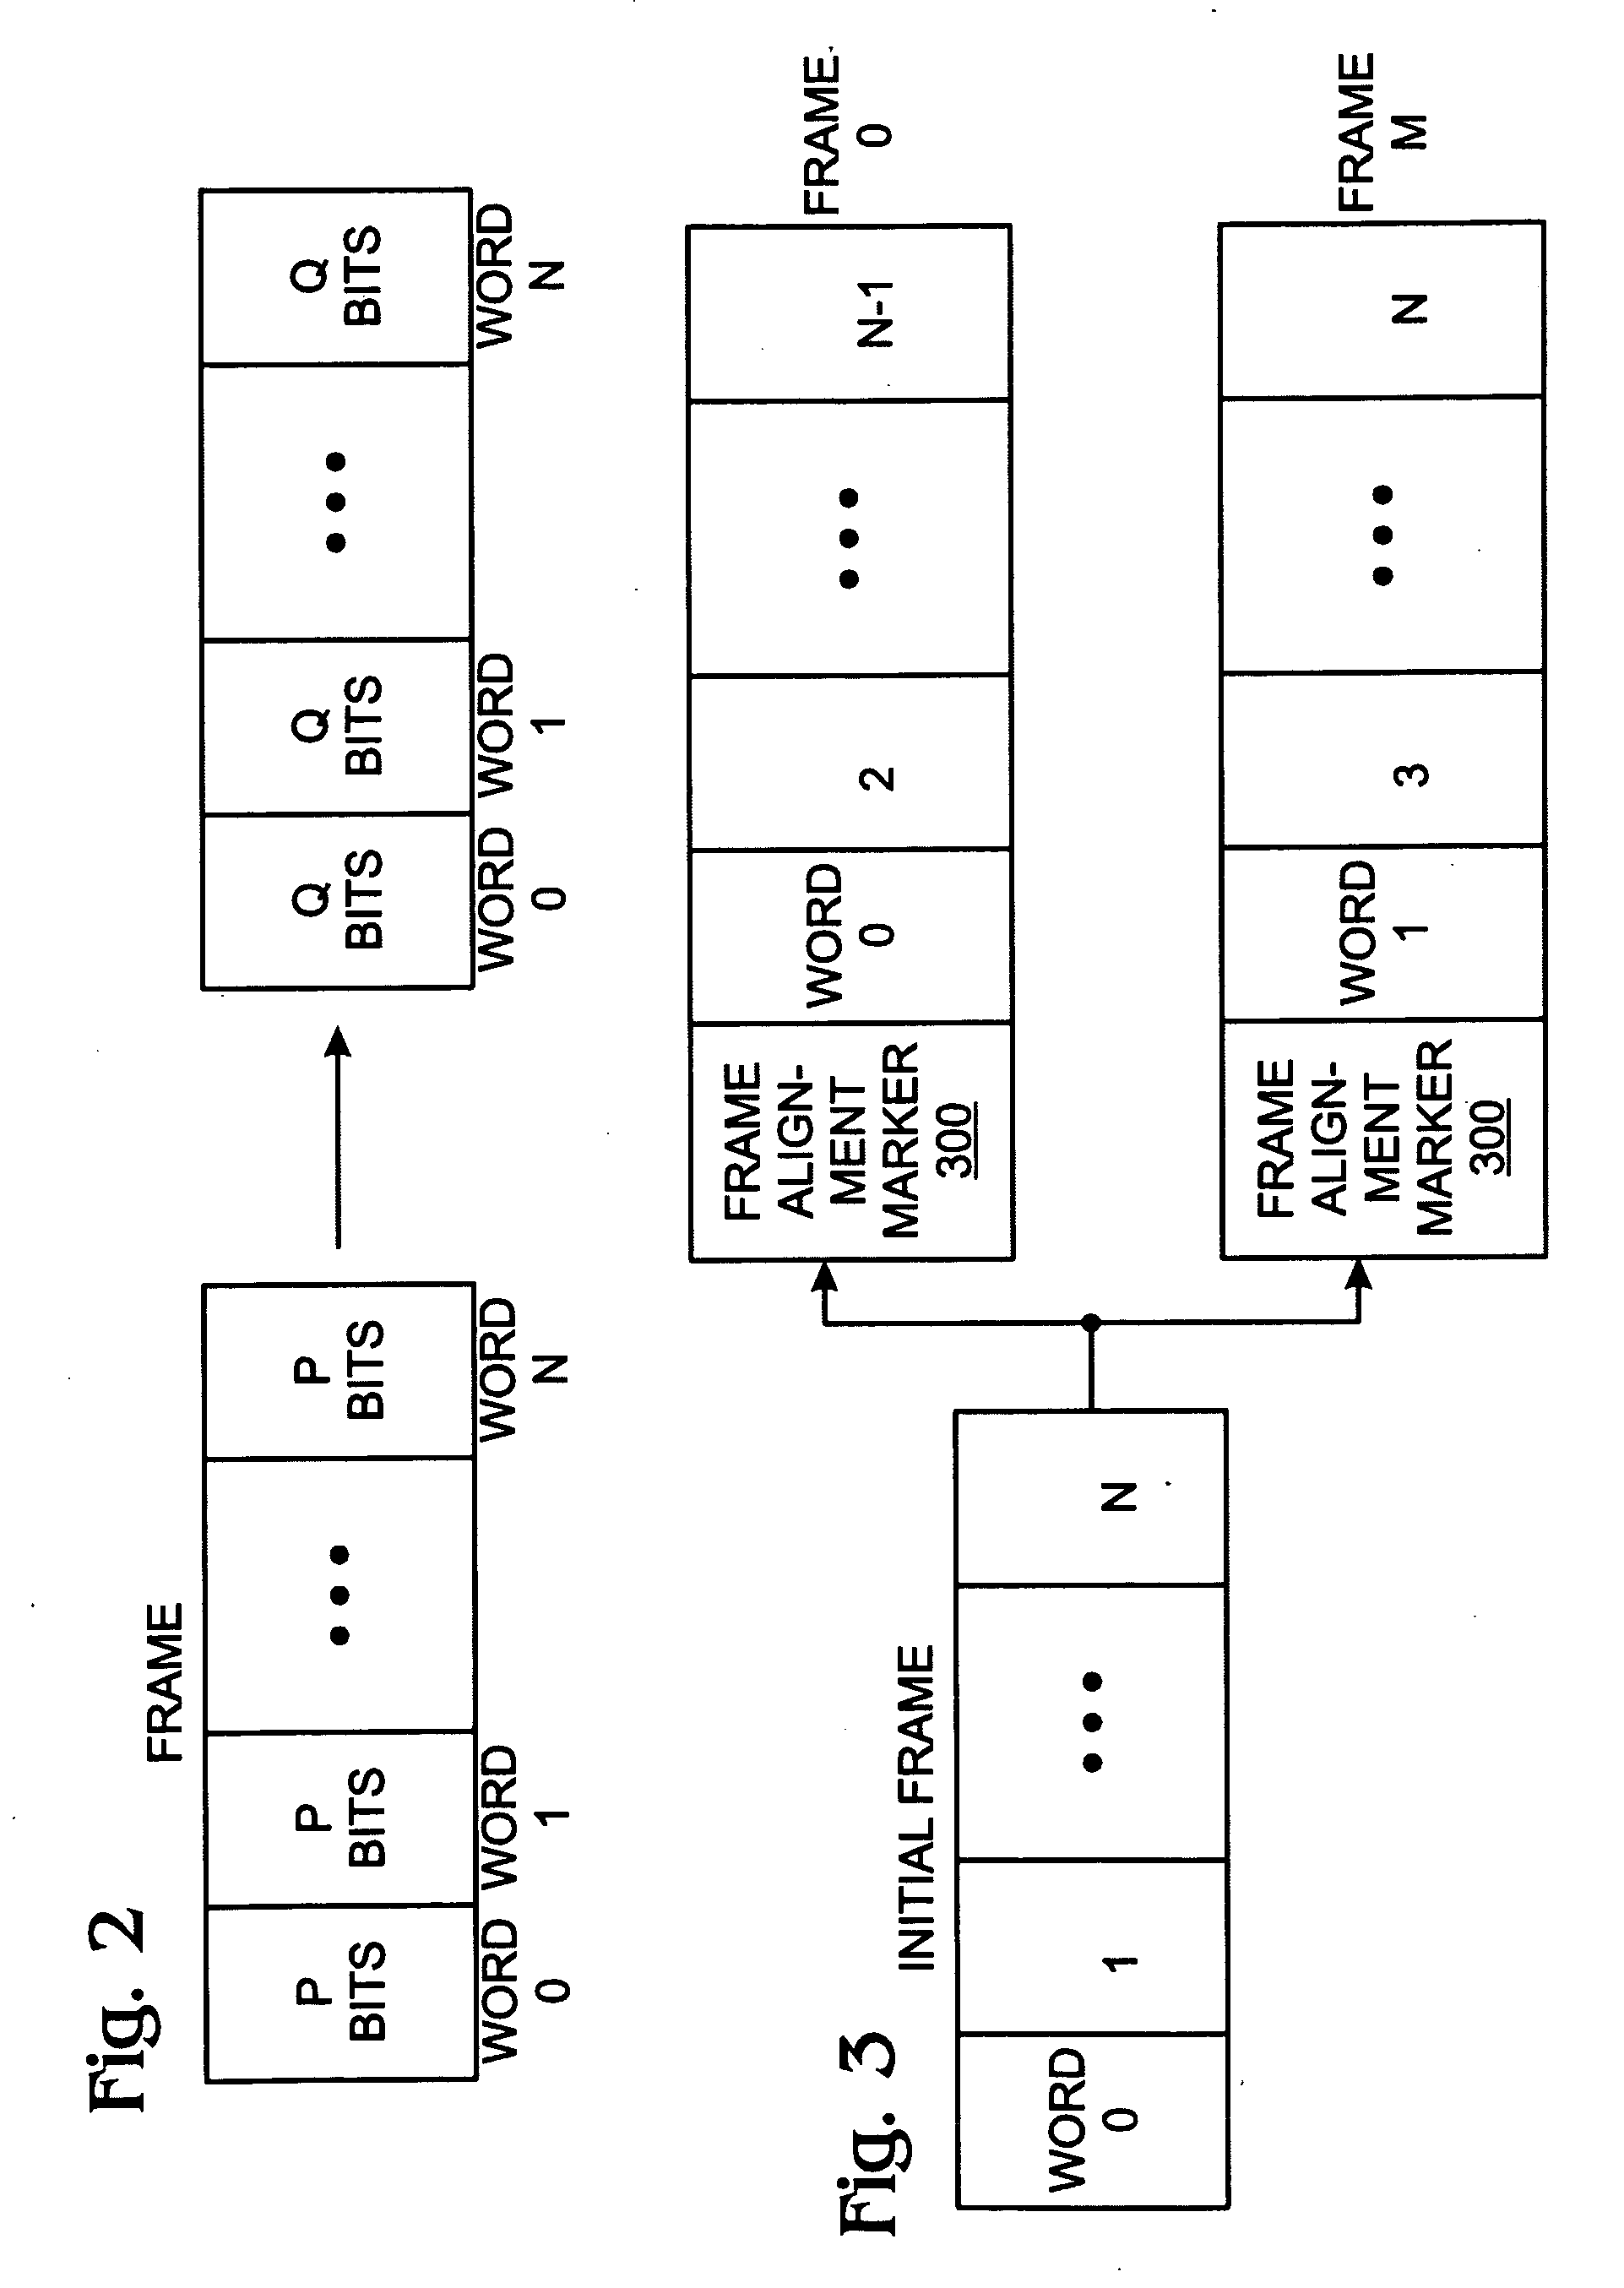 System and Method for Inverse Multiplexing Using Transcoding and Frame Alignment Markers